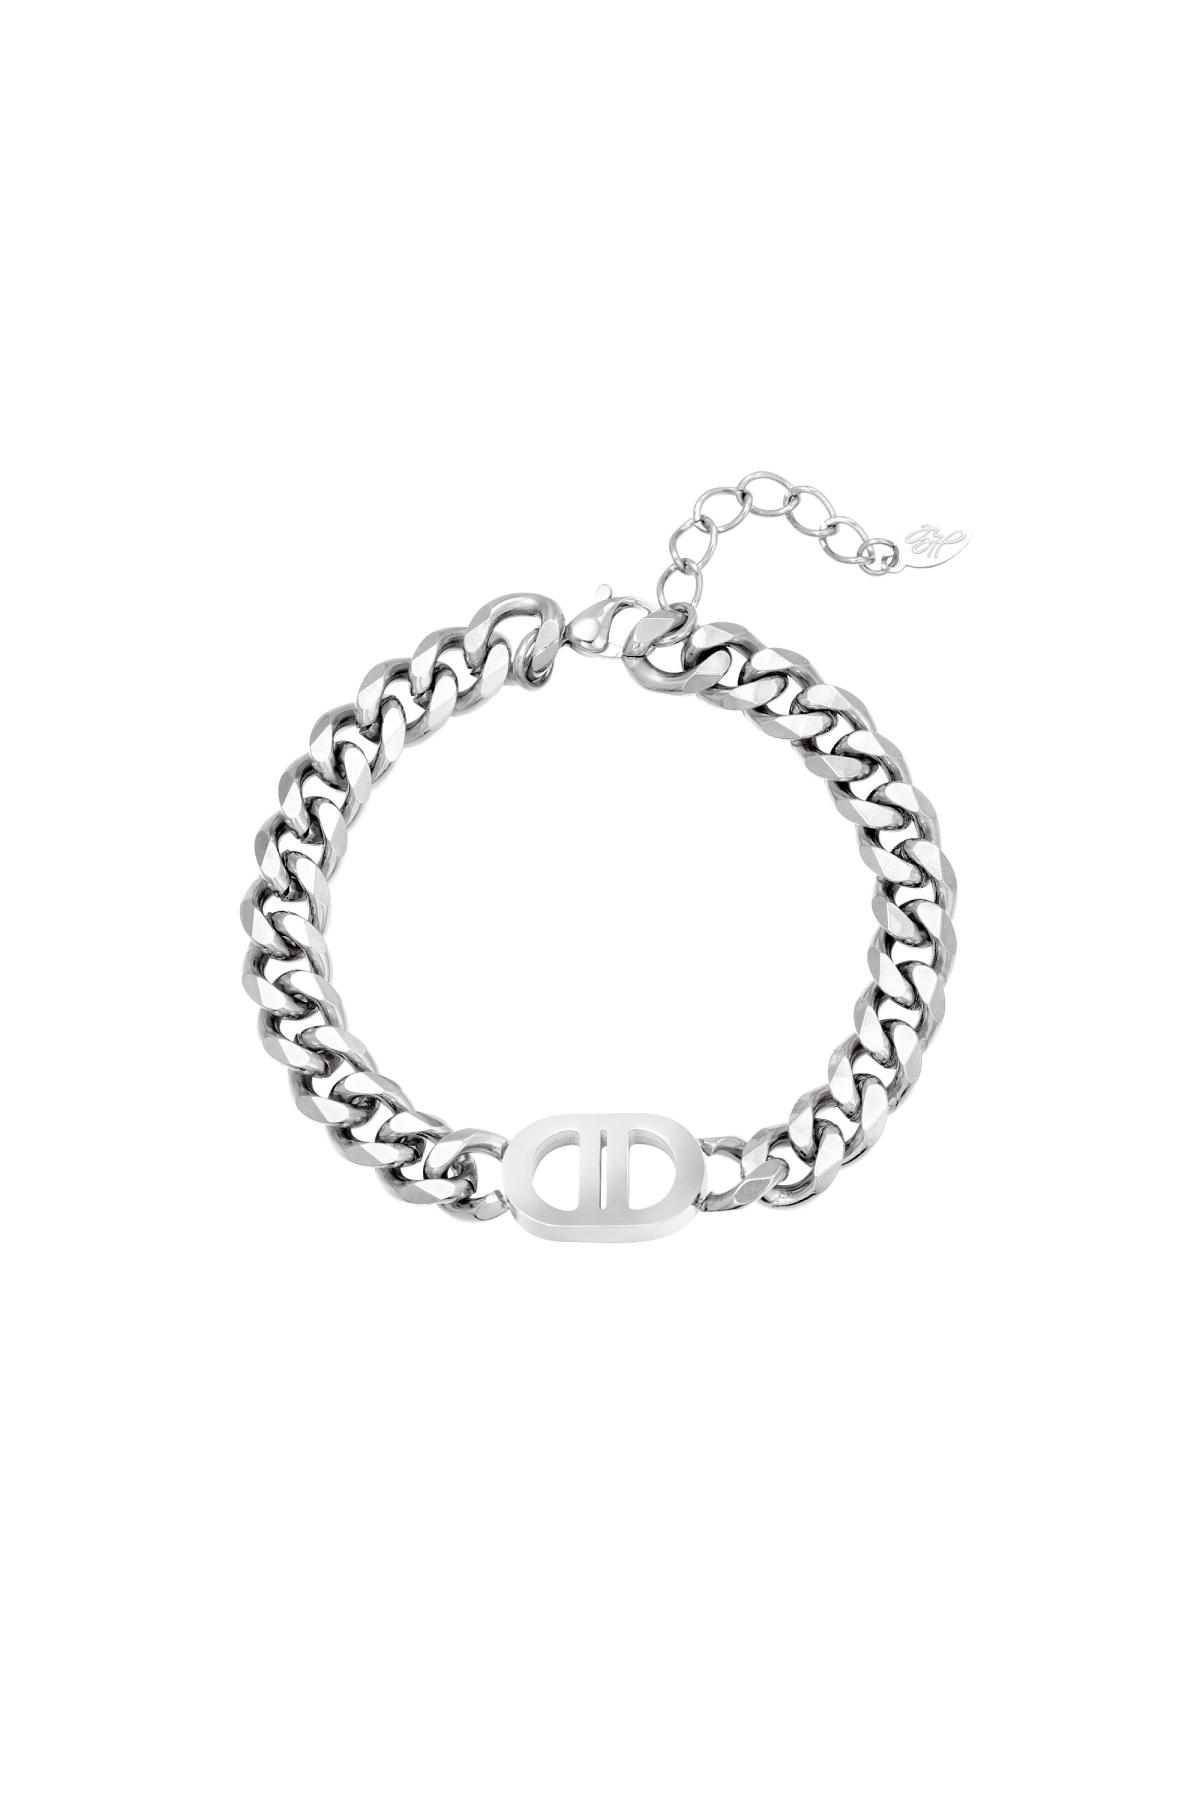 Silver / Bracelet The Good Life Silver Stainless Steel 